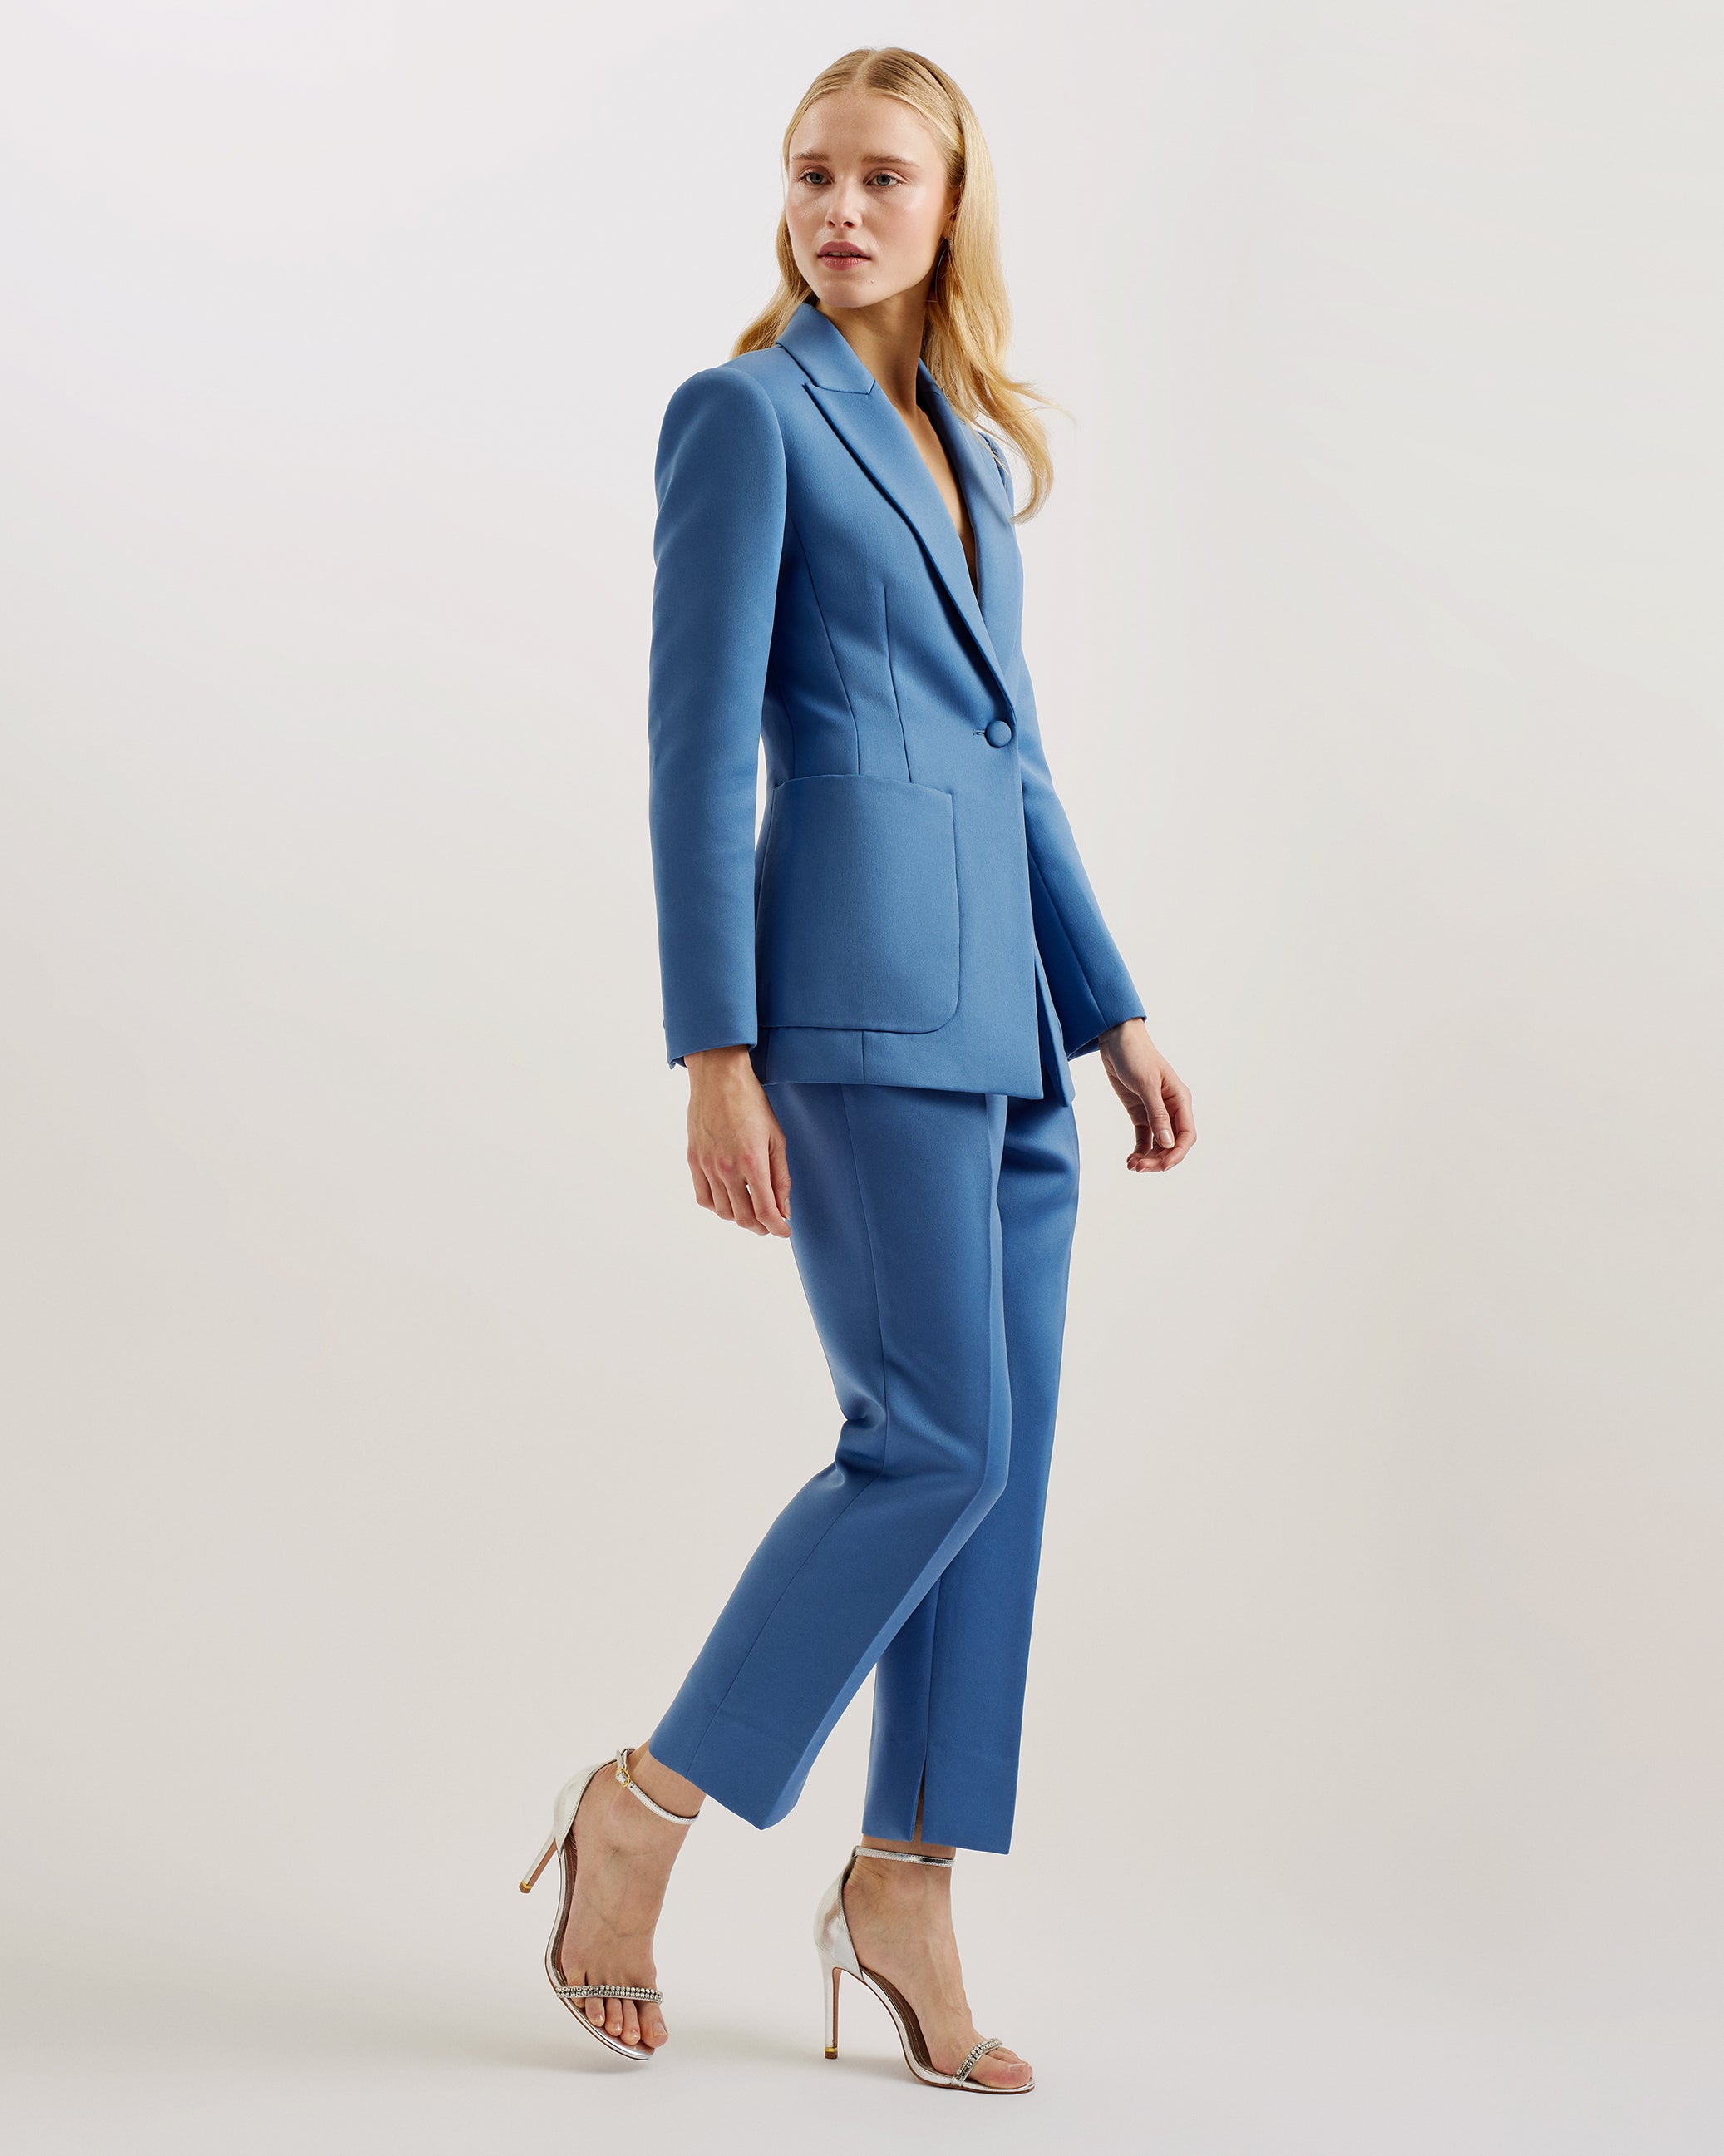 Autumn Formal Wear Set For Women Pink, Blue, And Black Blazer And Pant Suit  With Jacket And Next Ladies Trouser Suits From Matthewaw, $53.69